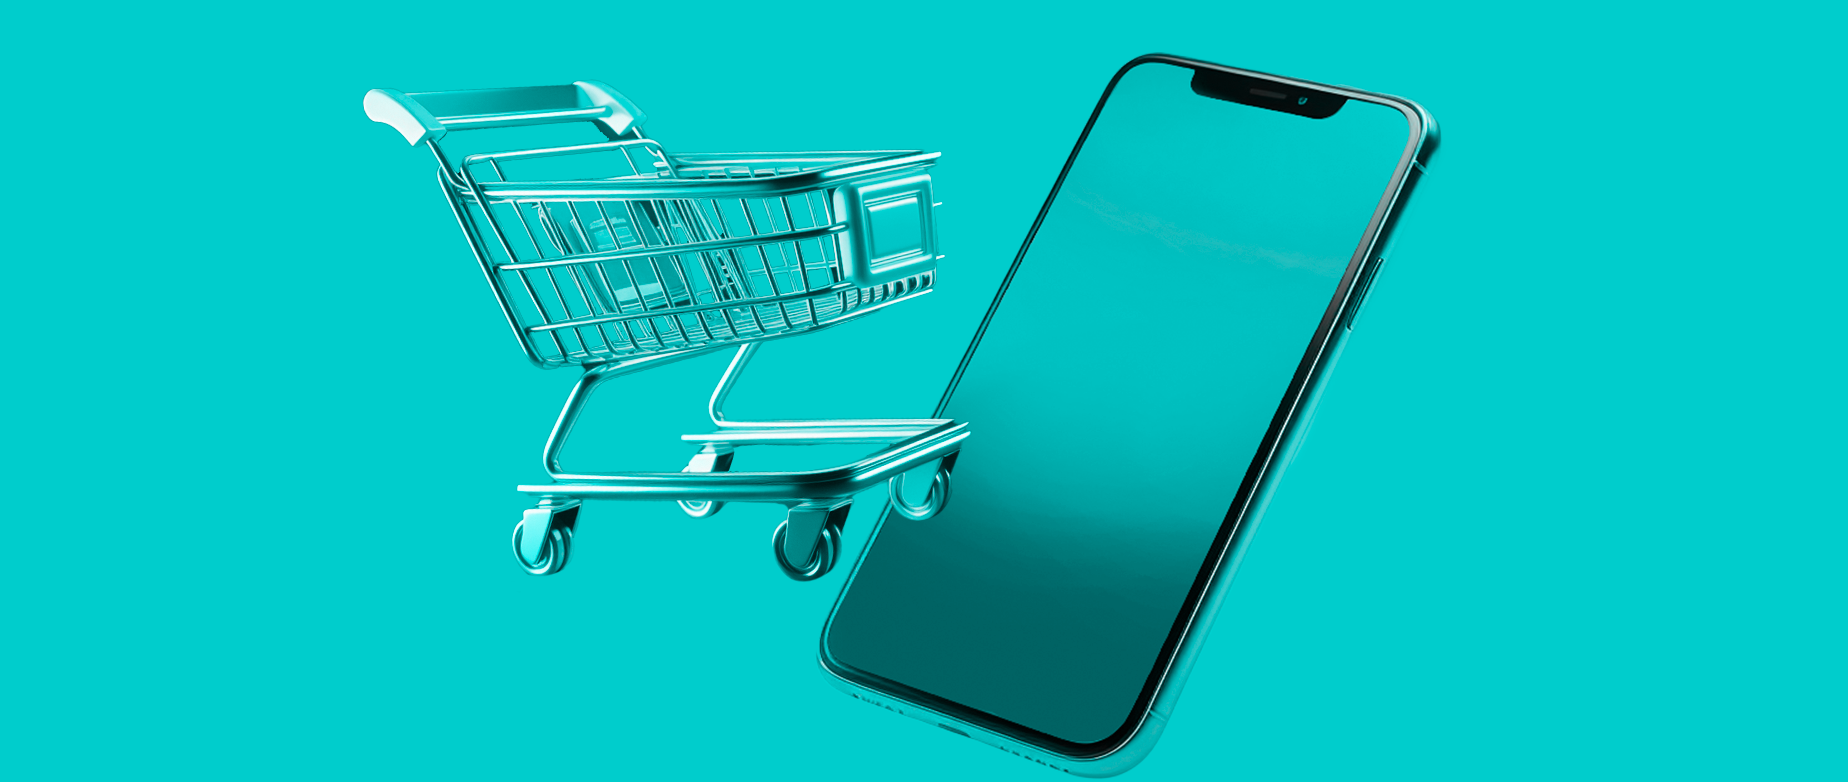 3D models of a shopping cart and a smartphone on a turquoise background.